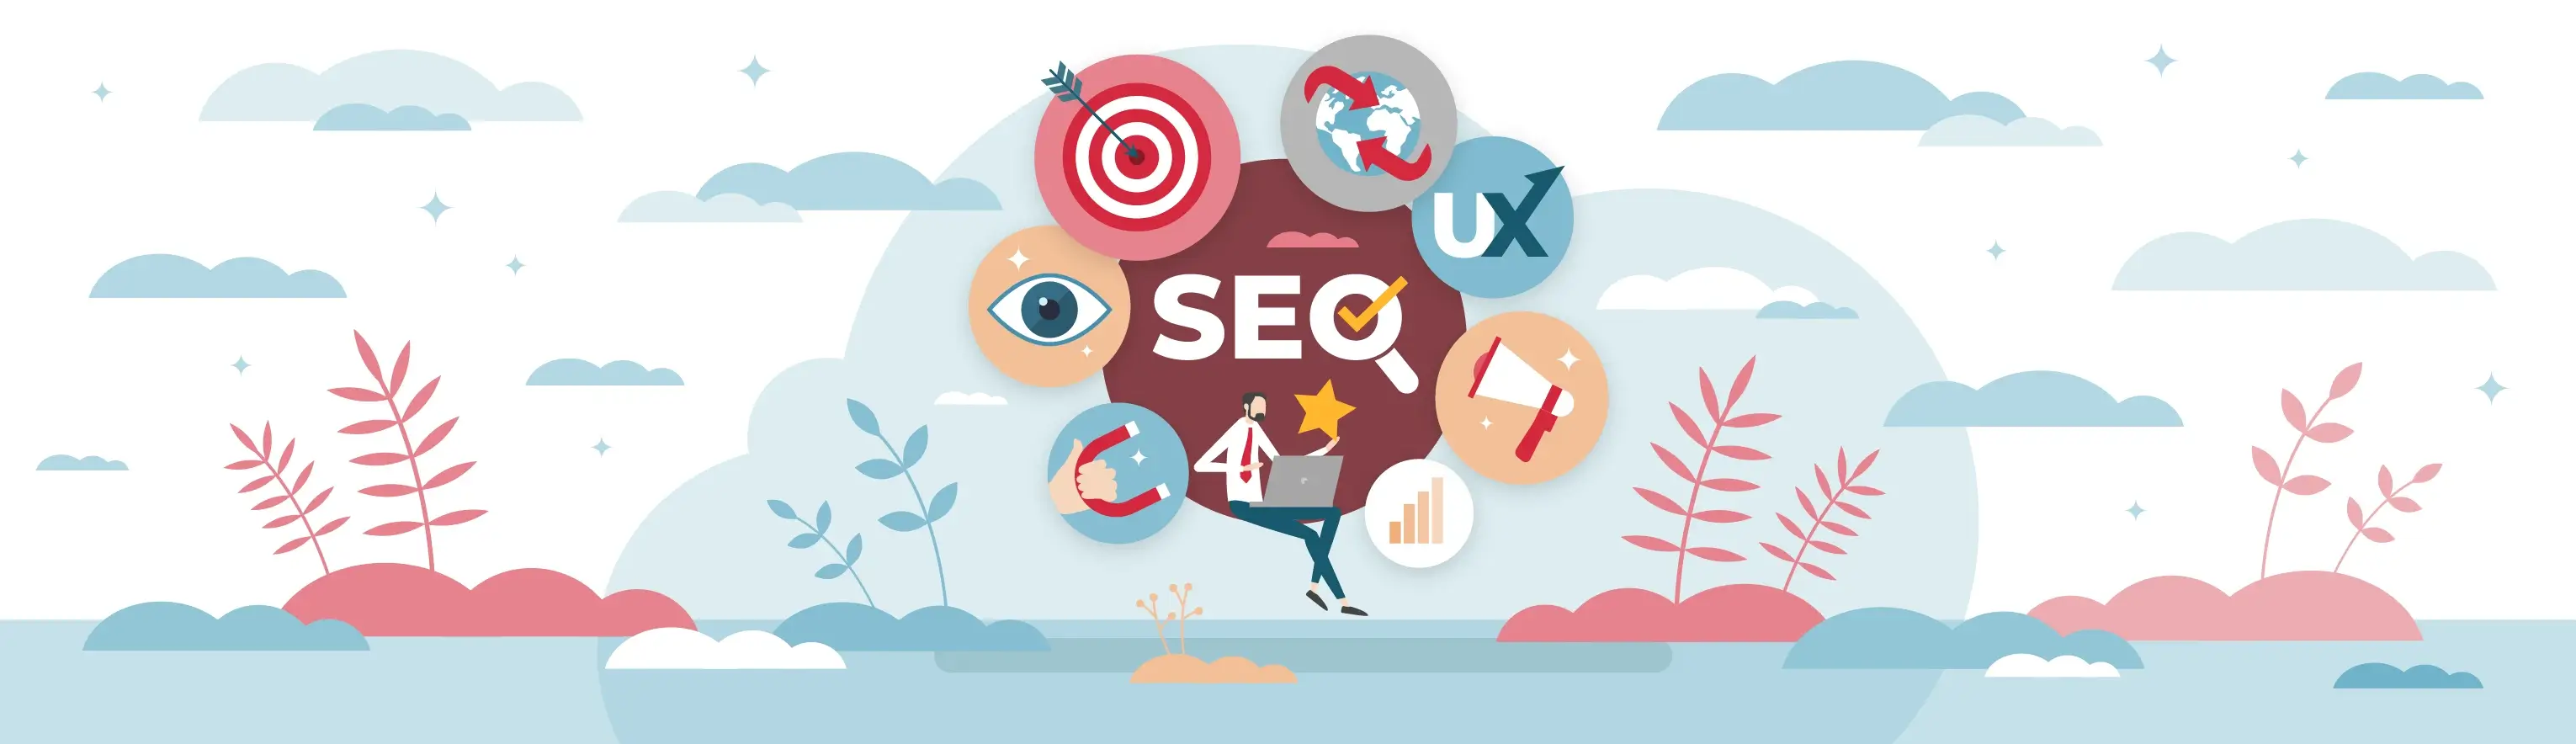 Benefits of SEO for Your Business: The Complete List